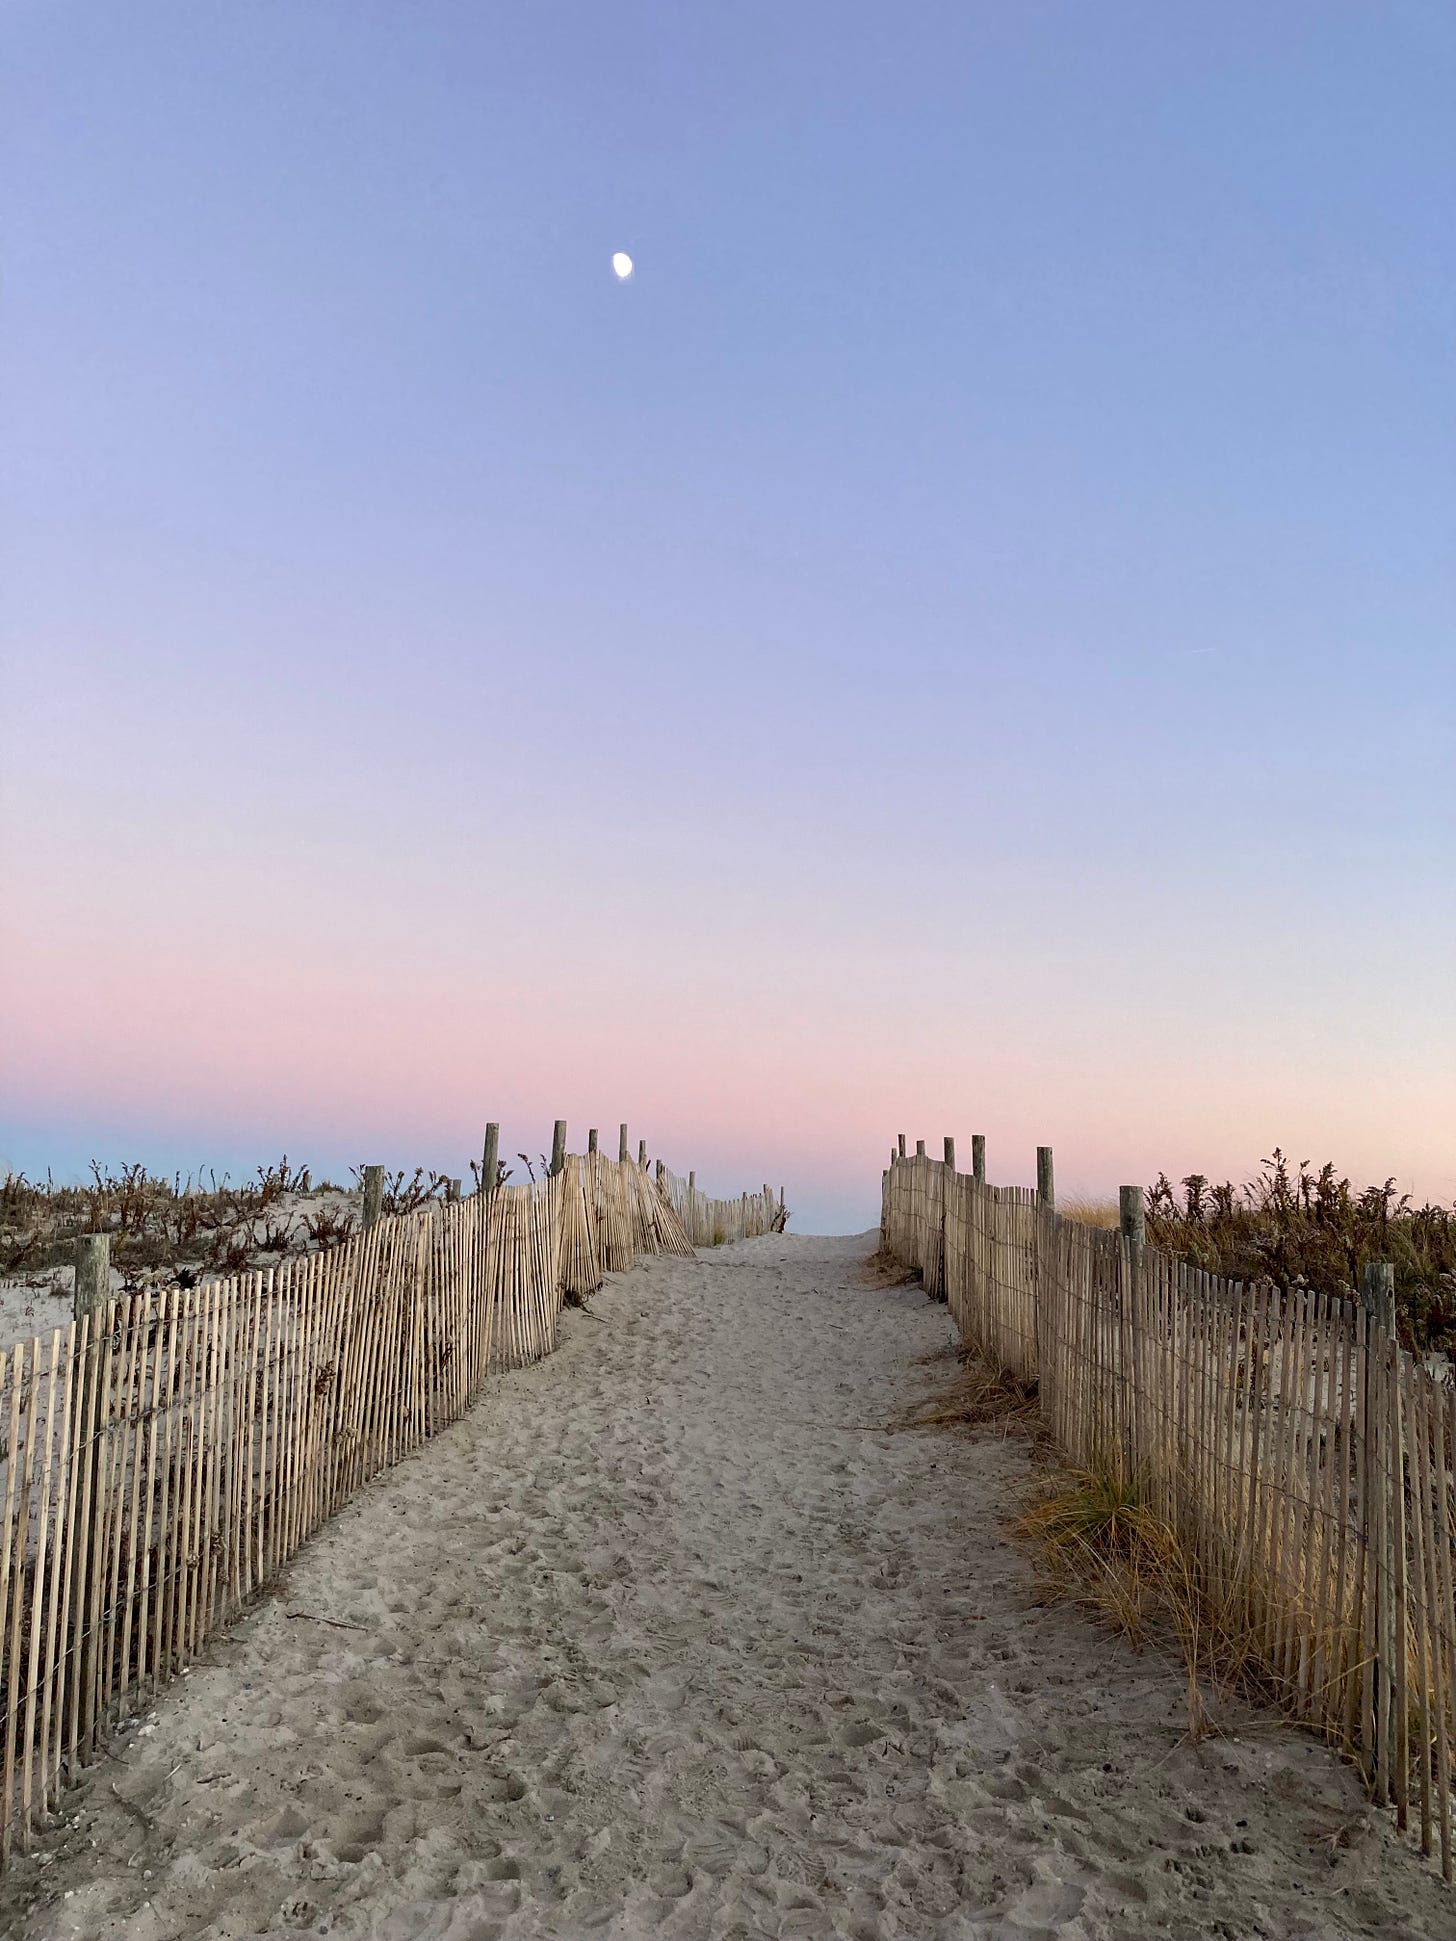 A sandy walkway through dunes at sunset. The sky fades periwinkle to rose, and a tiny half moon is visible in the sky